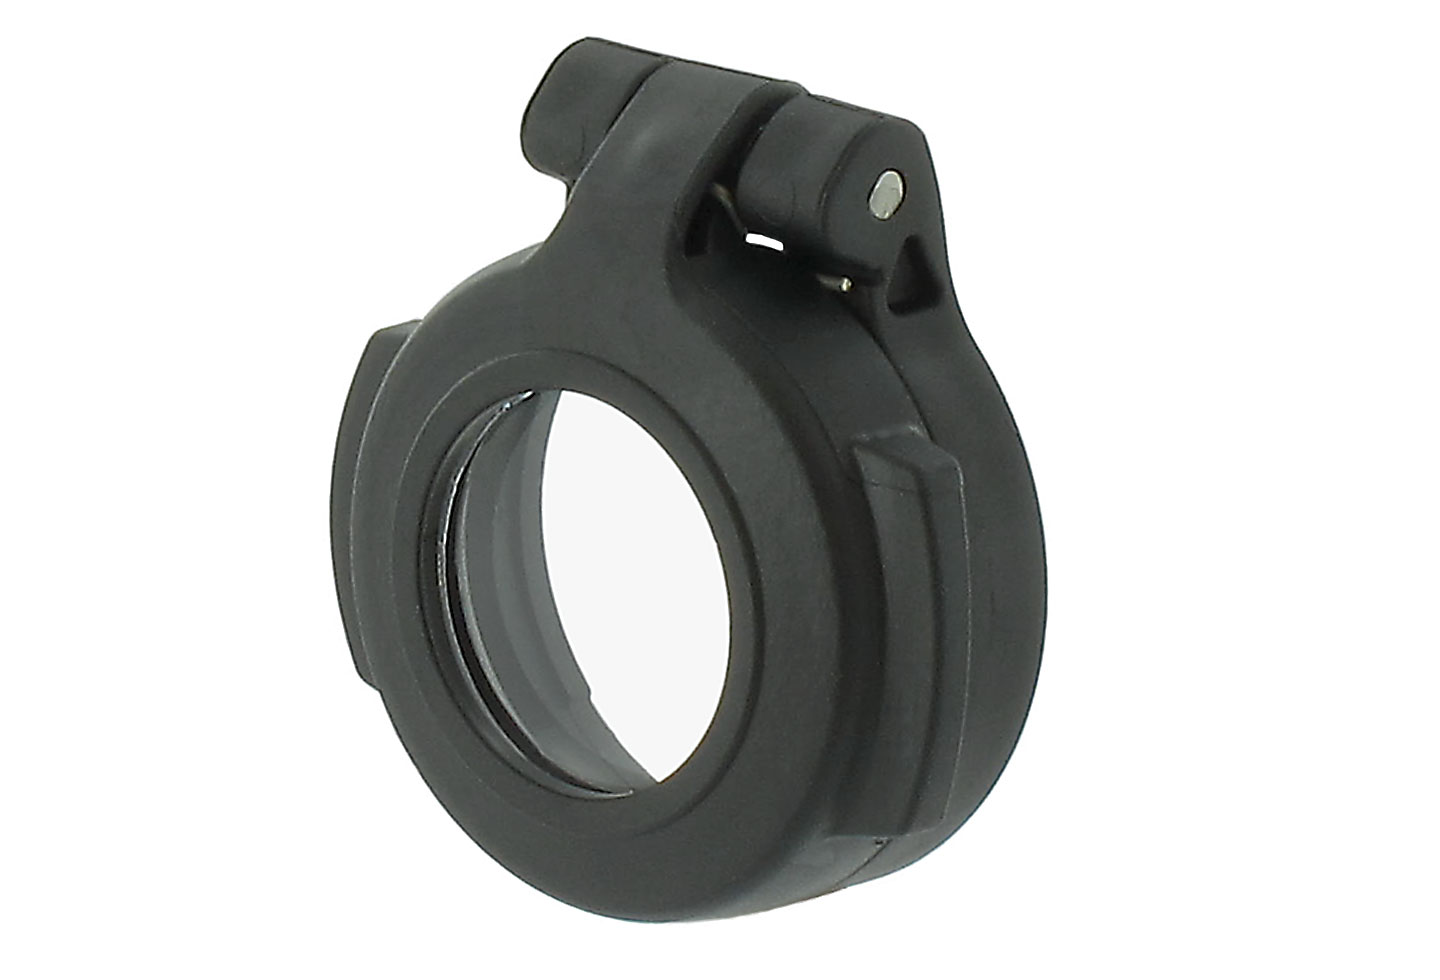 MicroT-2 / CompM5 Rear Clear Lens Cover